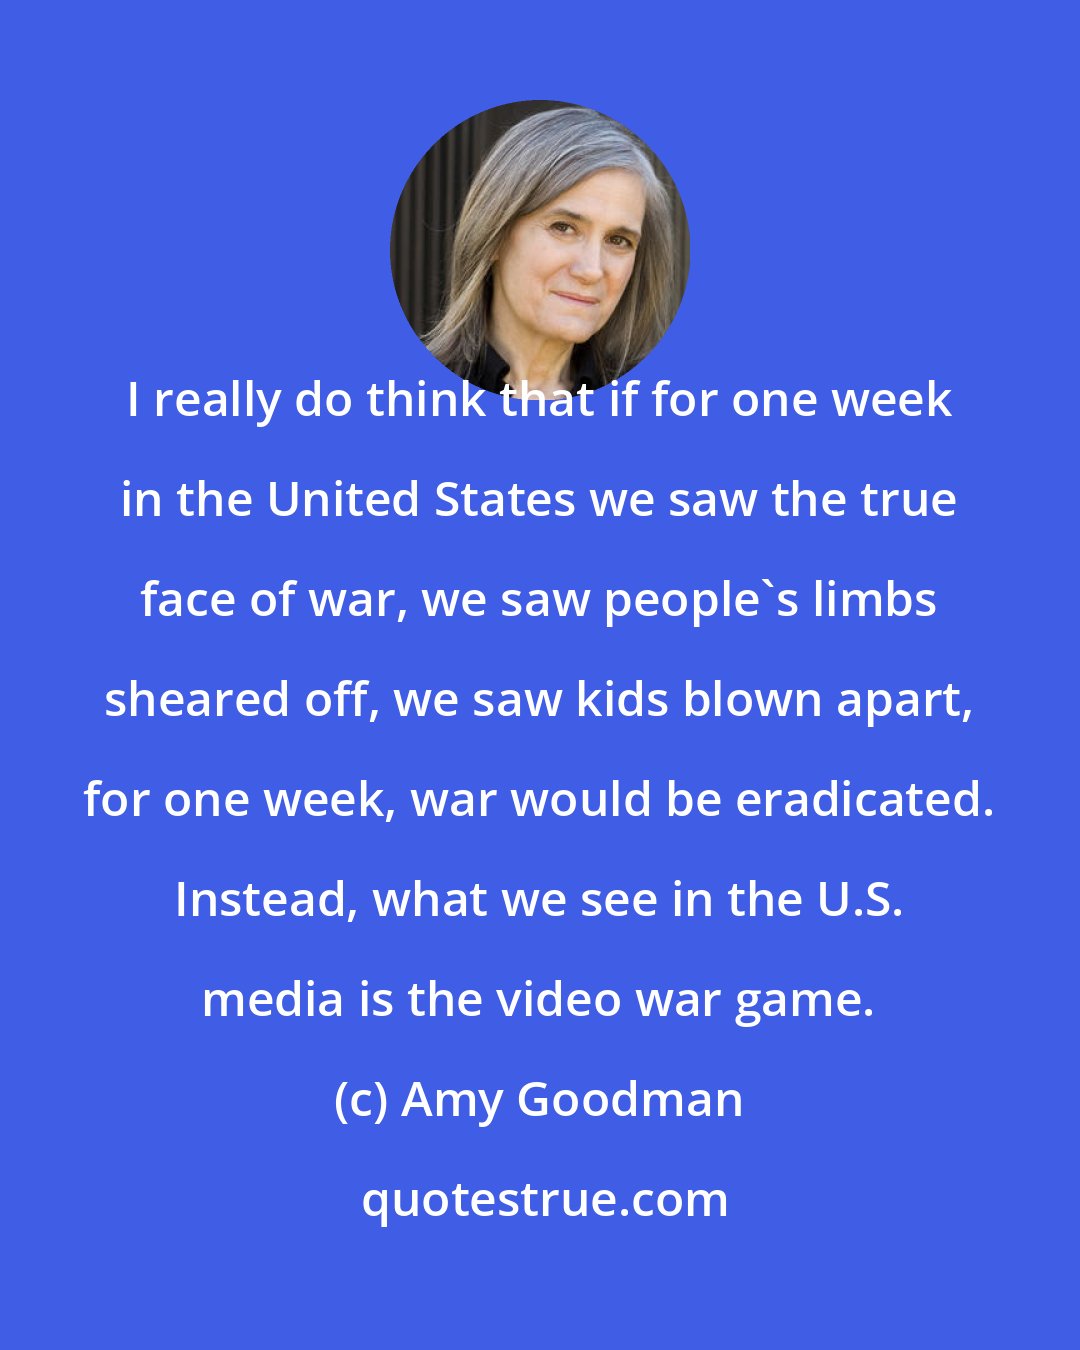 Amy Goodman: I really do think that if for one week in the United States we saw the true face of war, we saw people's limbs sheared off, we saw kids blown apart, for one week, war would be eradicated. Instead, what we see in the U.S. media is the video war game.